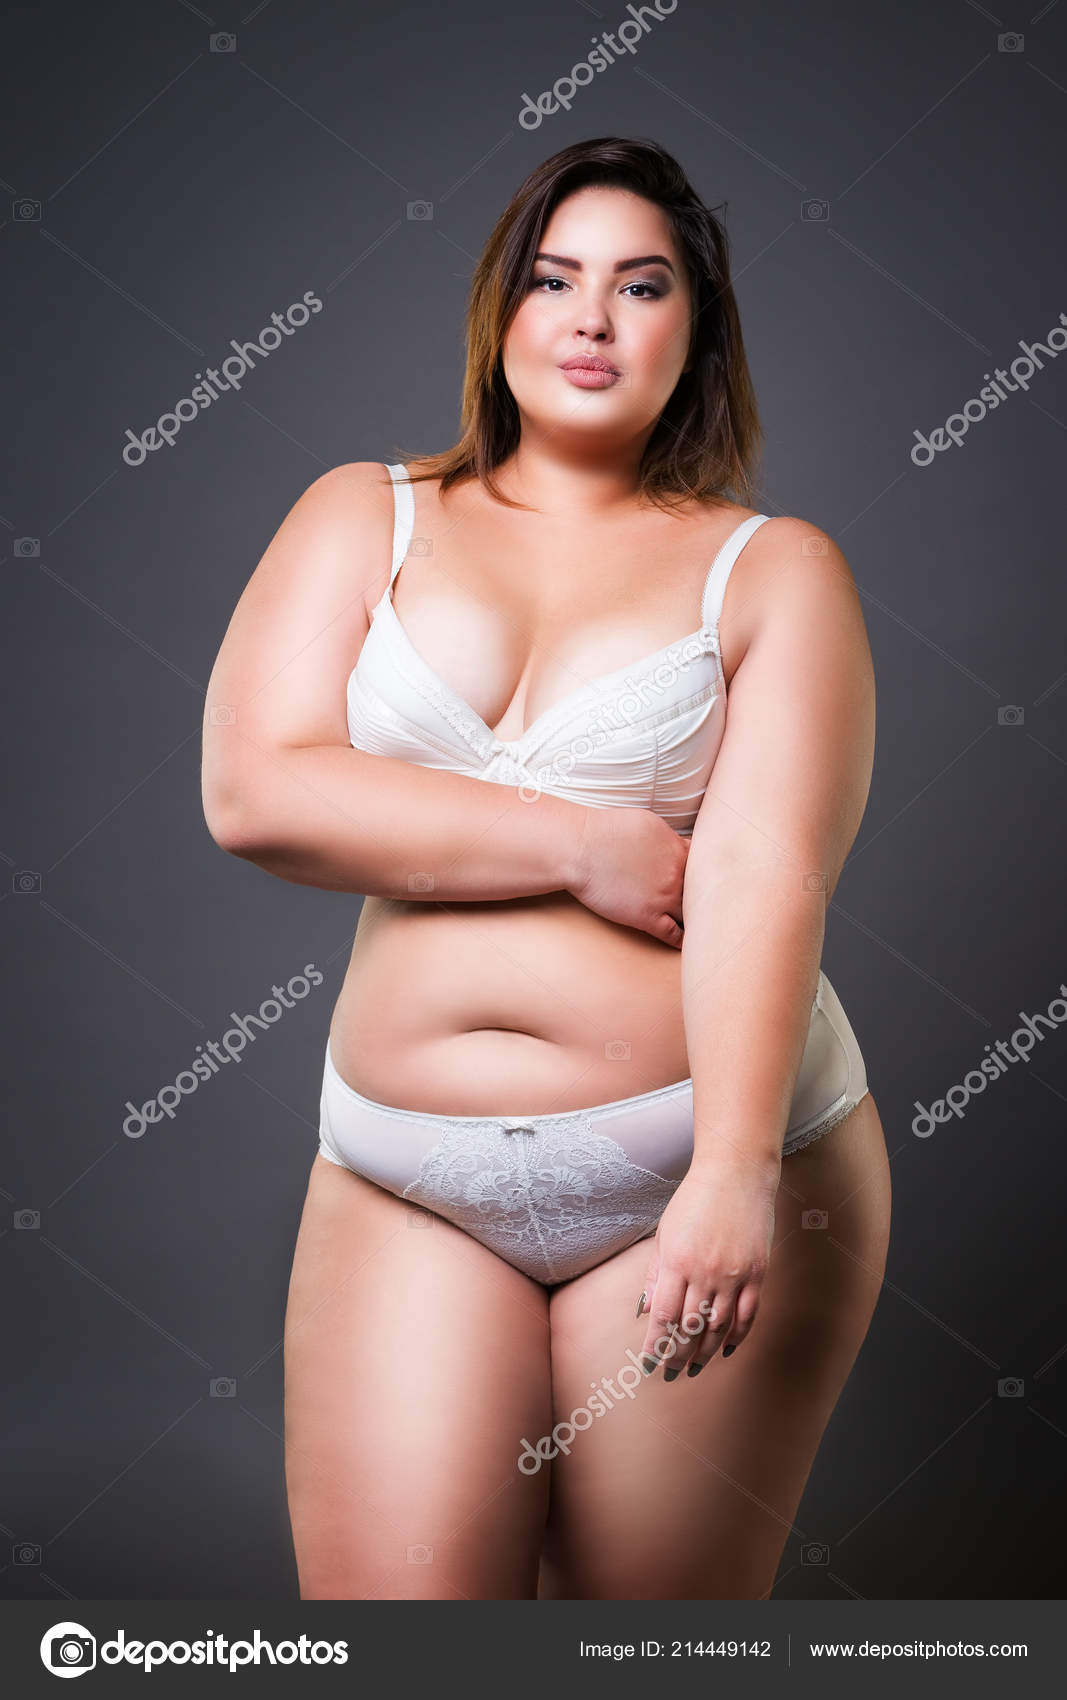 Size Model Lingerie Fat Woman Gray Studio Background Overweight Female Stock Photo by 214449142